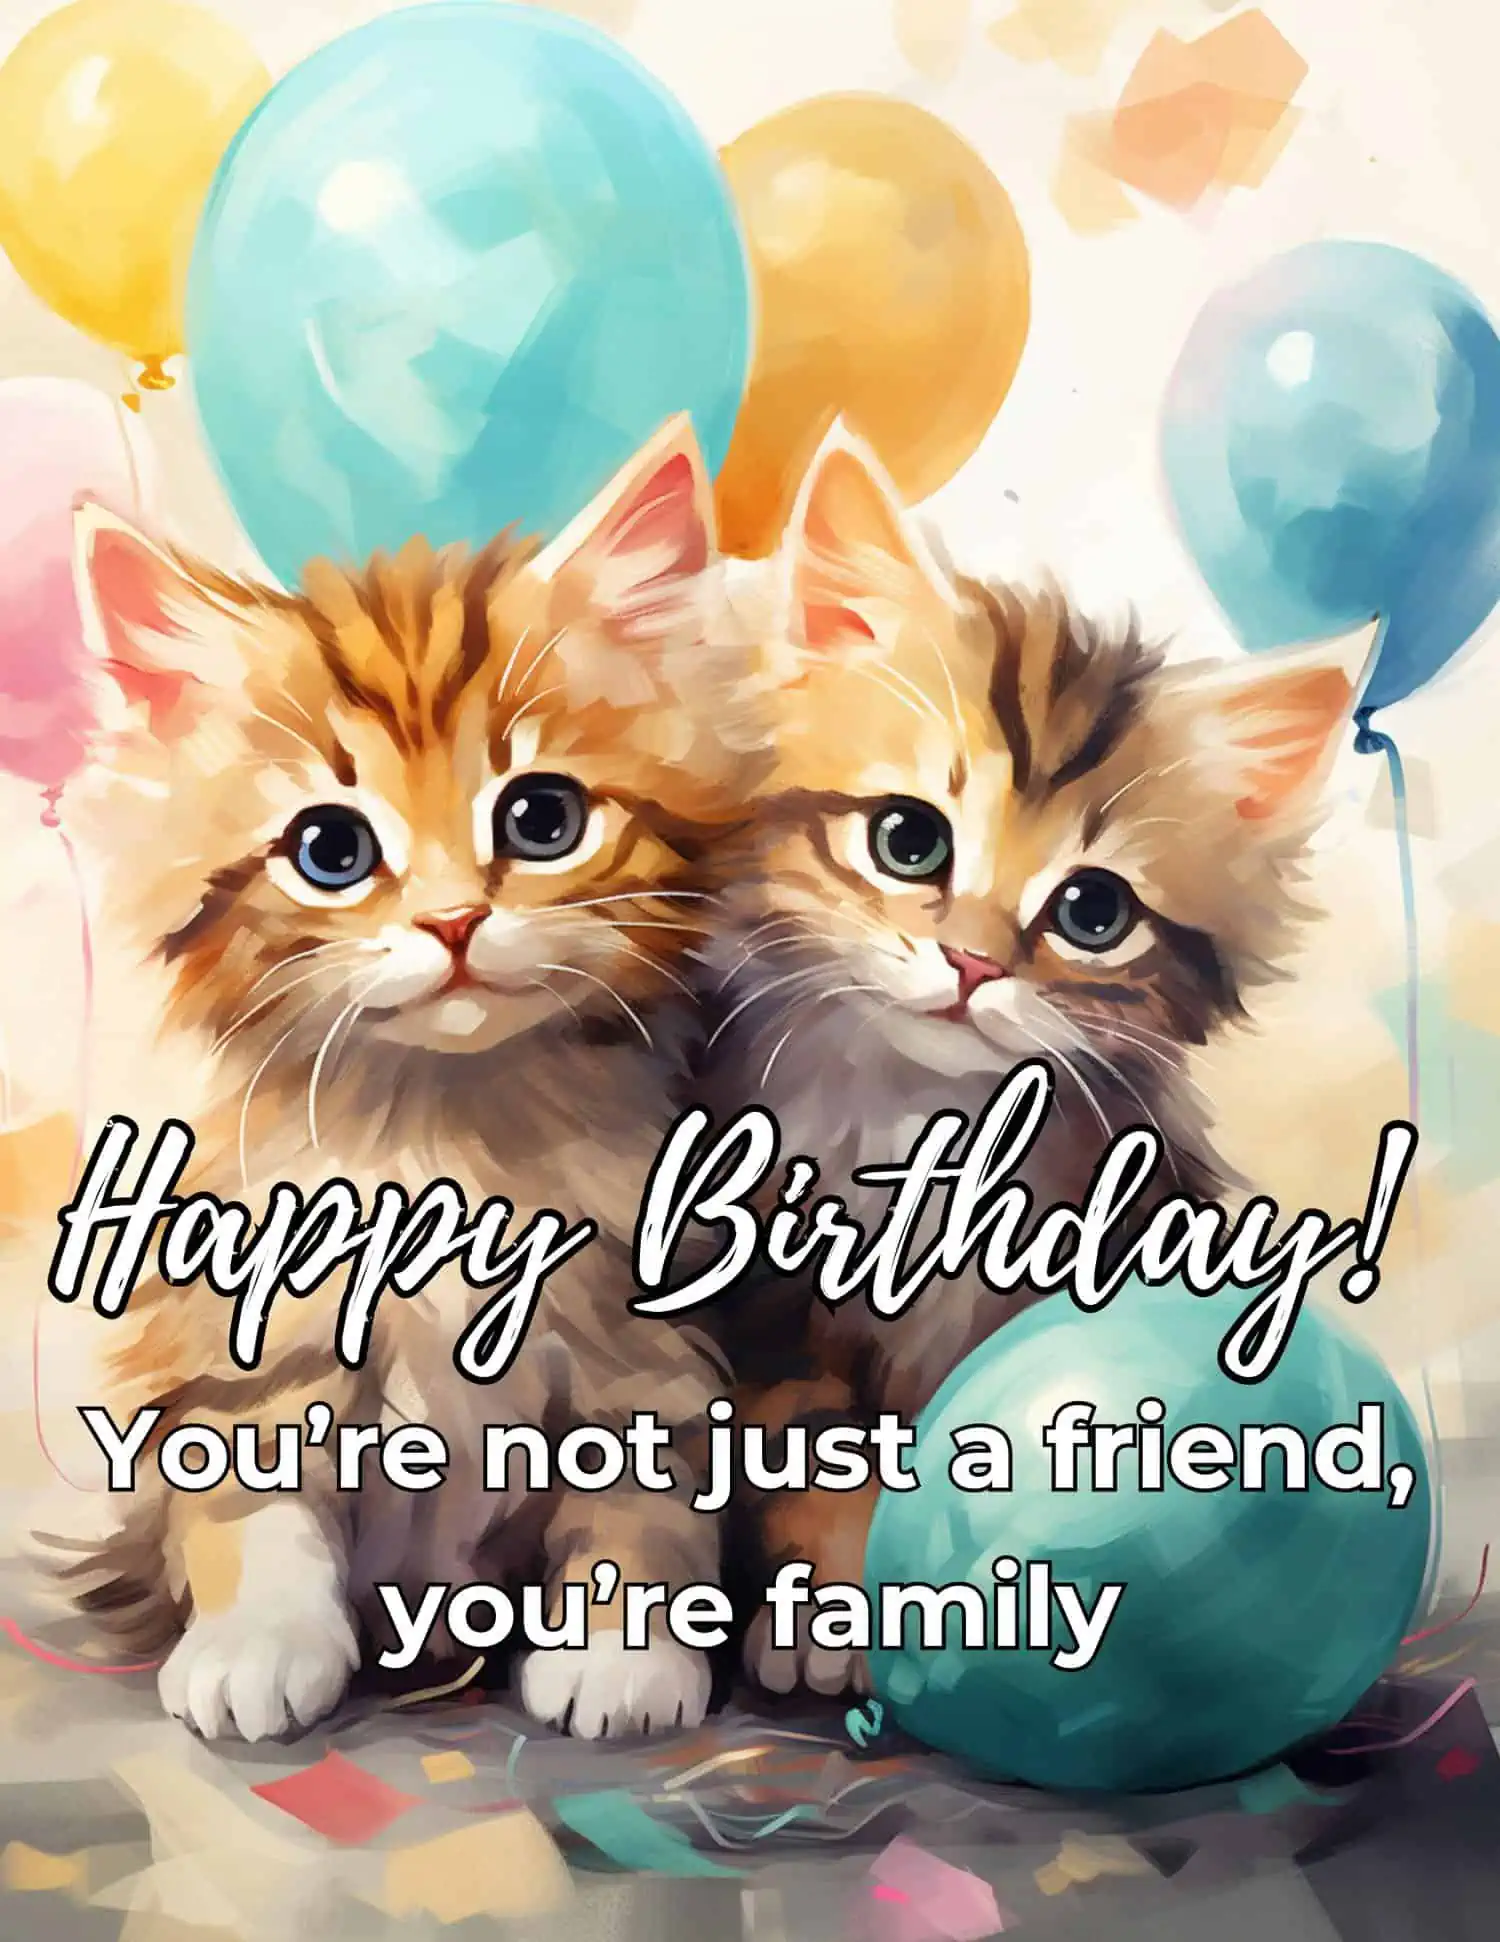 Explore these concise yet impactful birthday messages, each crafted to express your deep connection and warm wishes for your best friend's birthday.